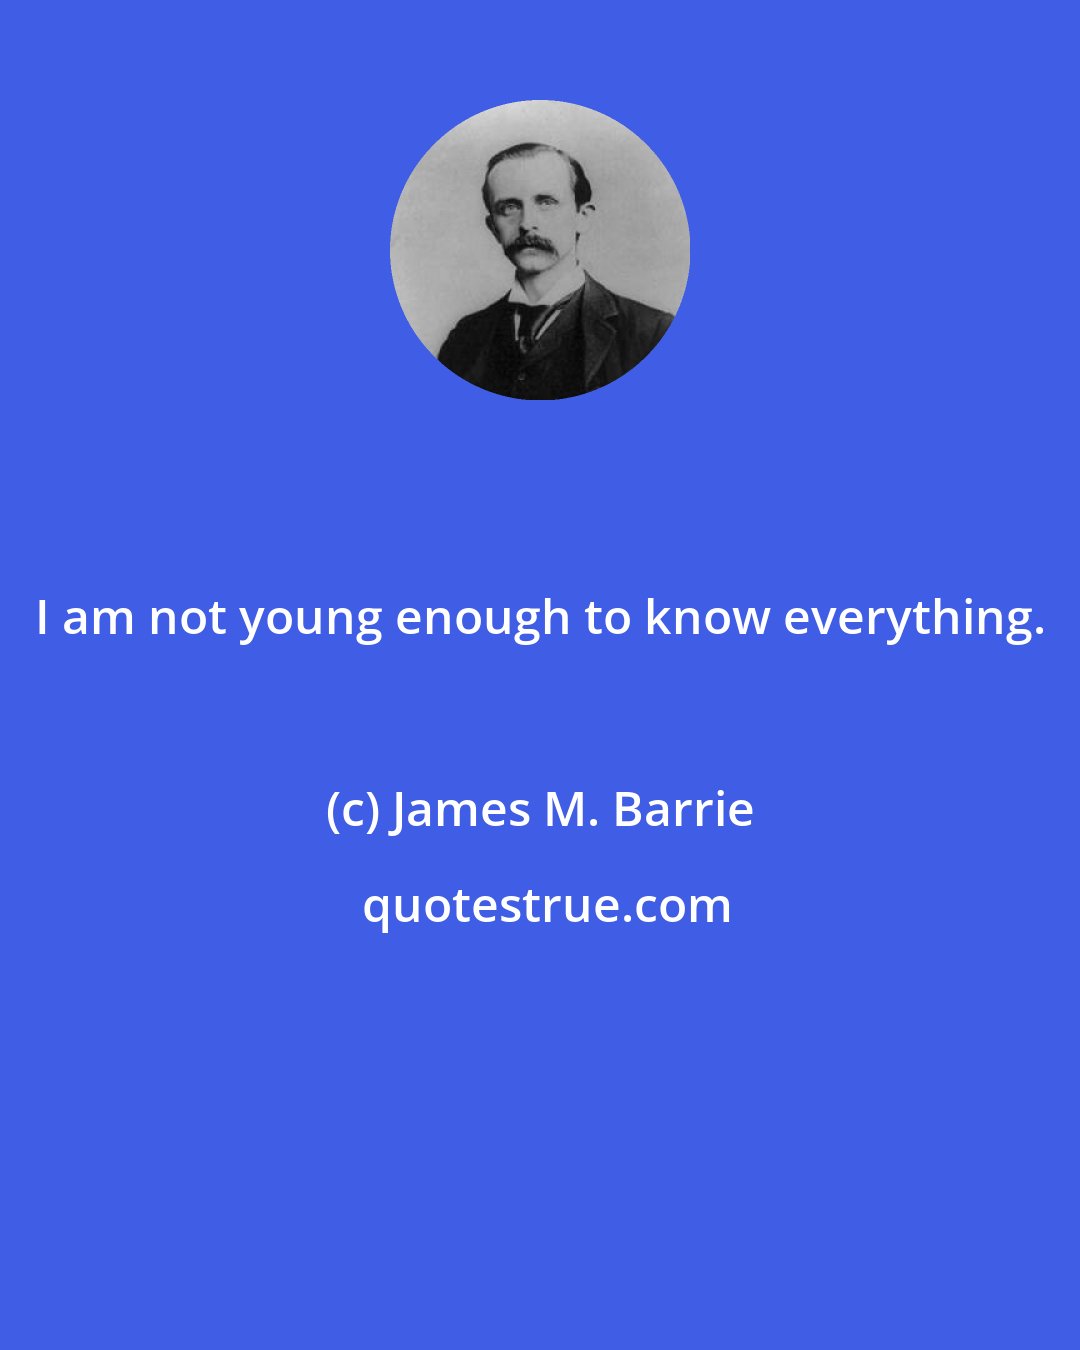 James M. Barrie: I am not young enough to know everything.